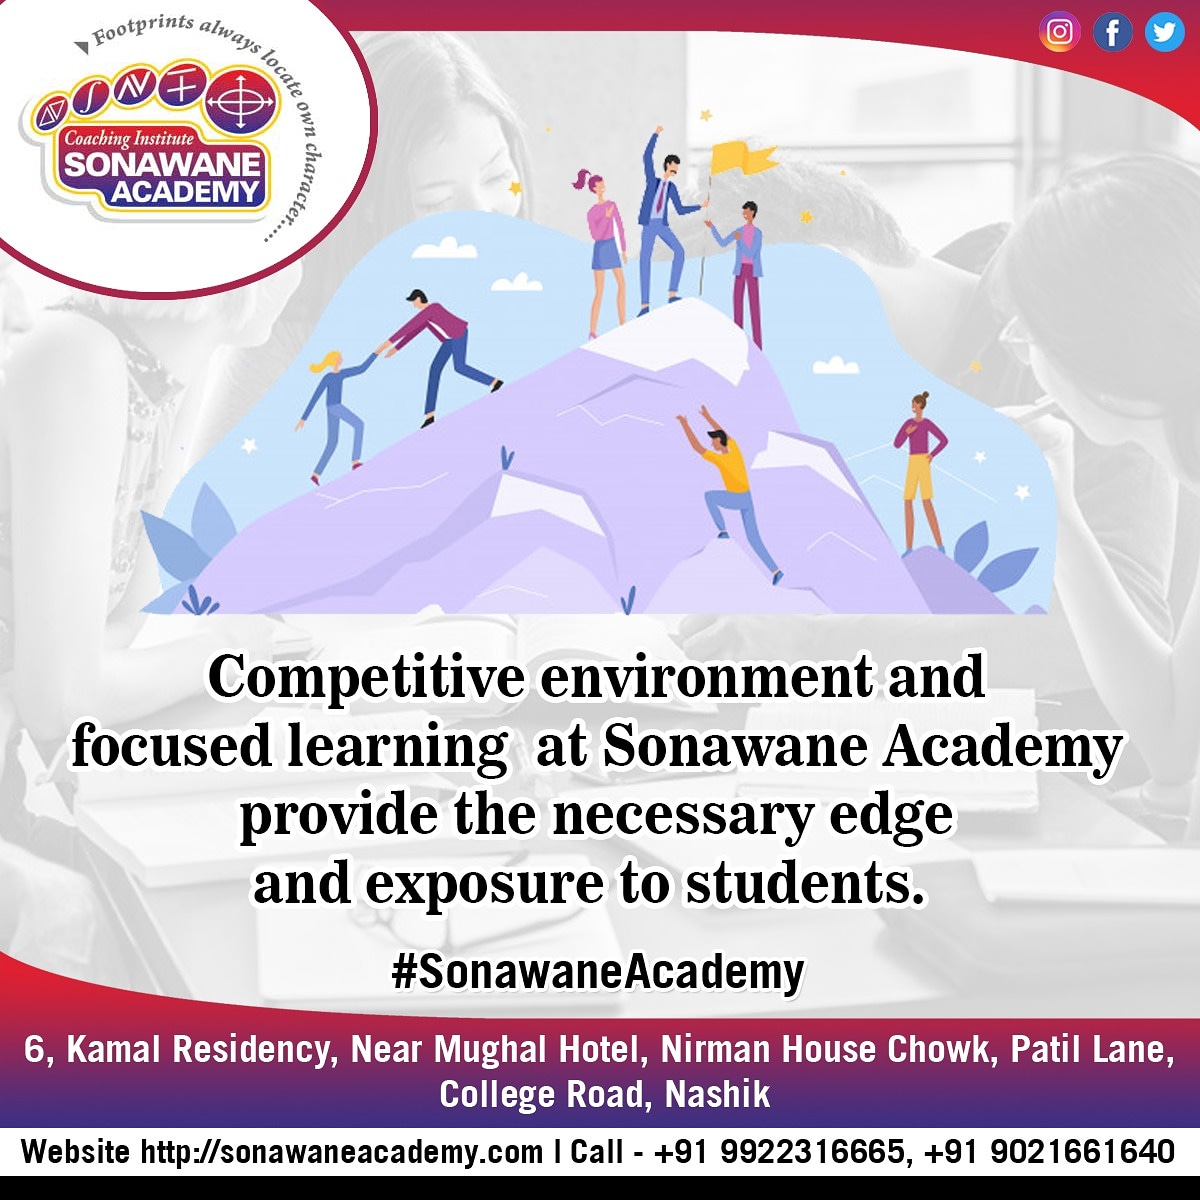 We have legacy of making students ready for future endeavours!

#sonawaneacademy #academy #education #mathsclass #IITJEE #monday #motivation #training #mondaymotivation